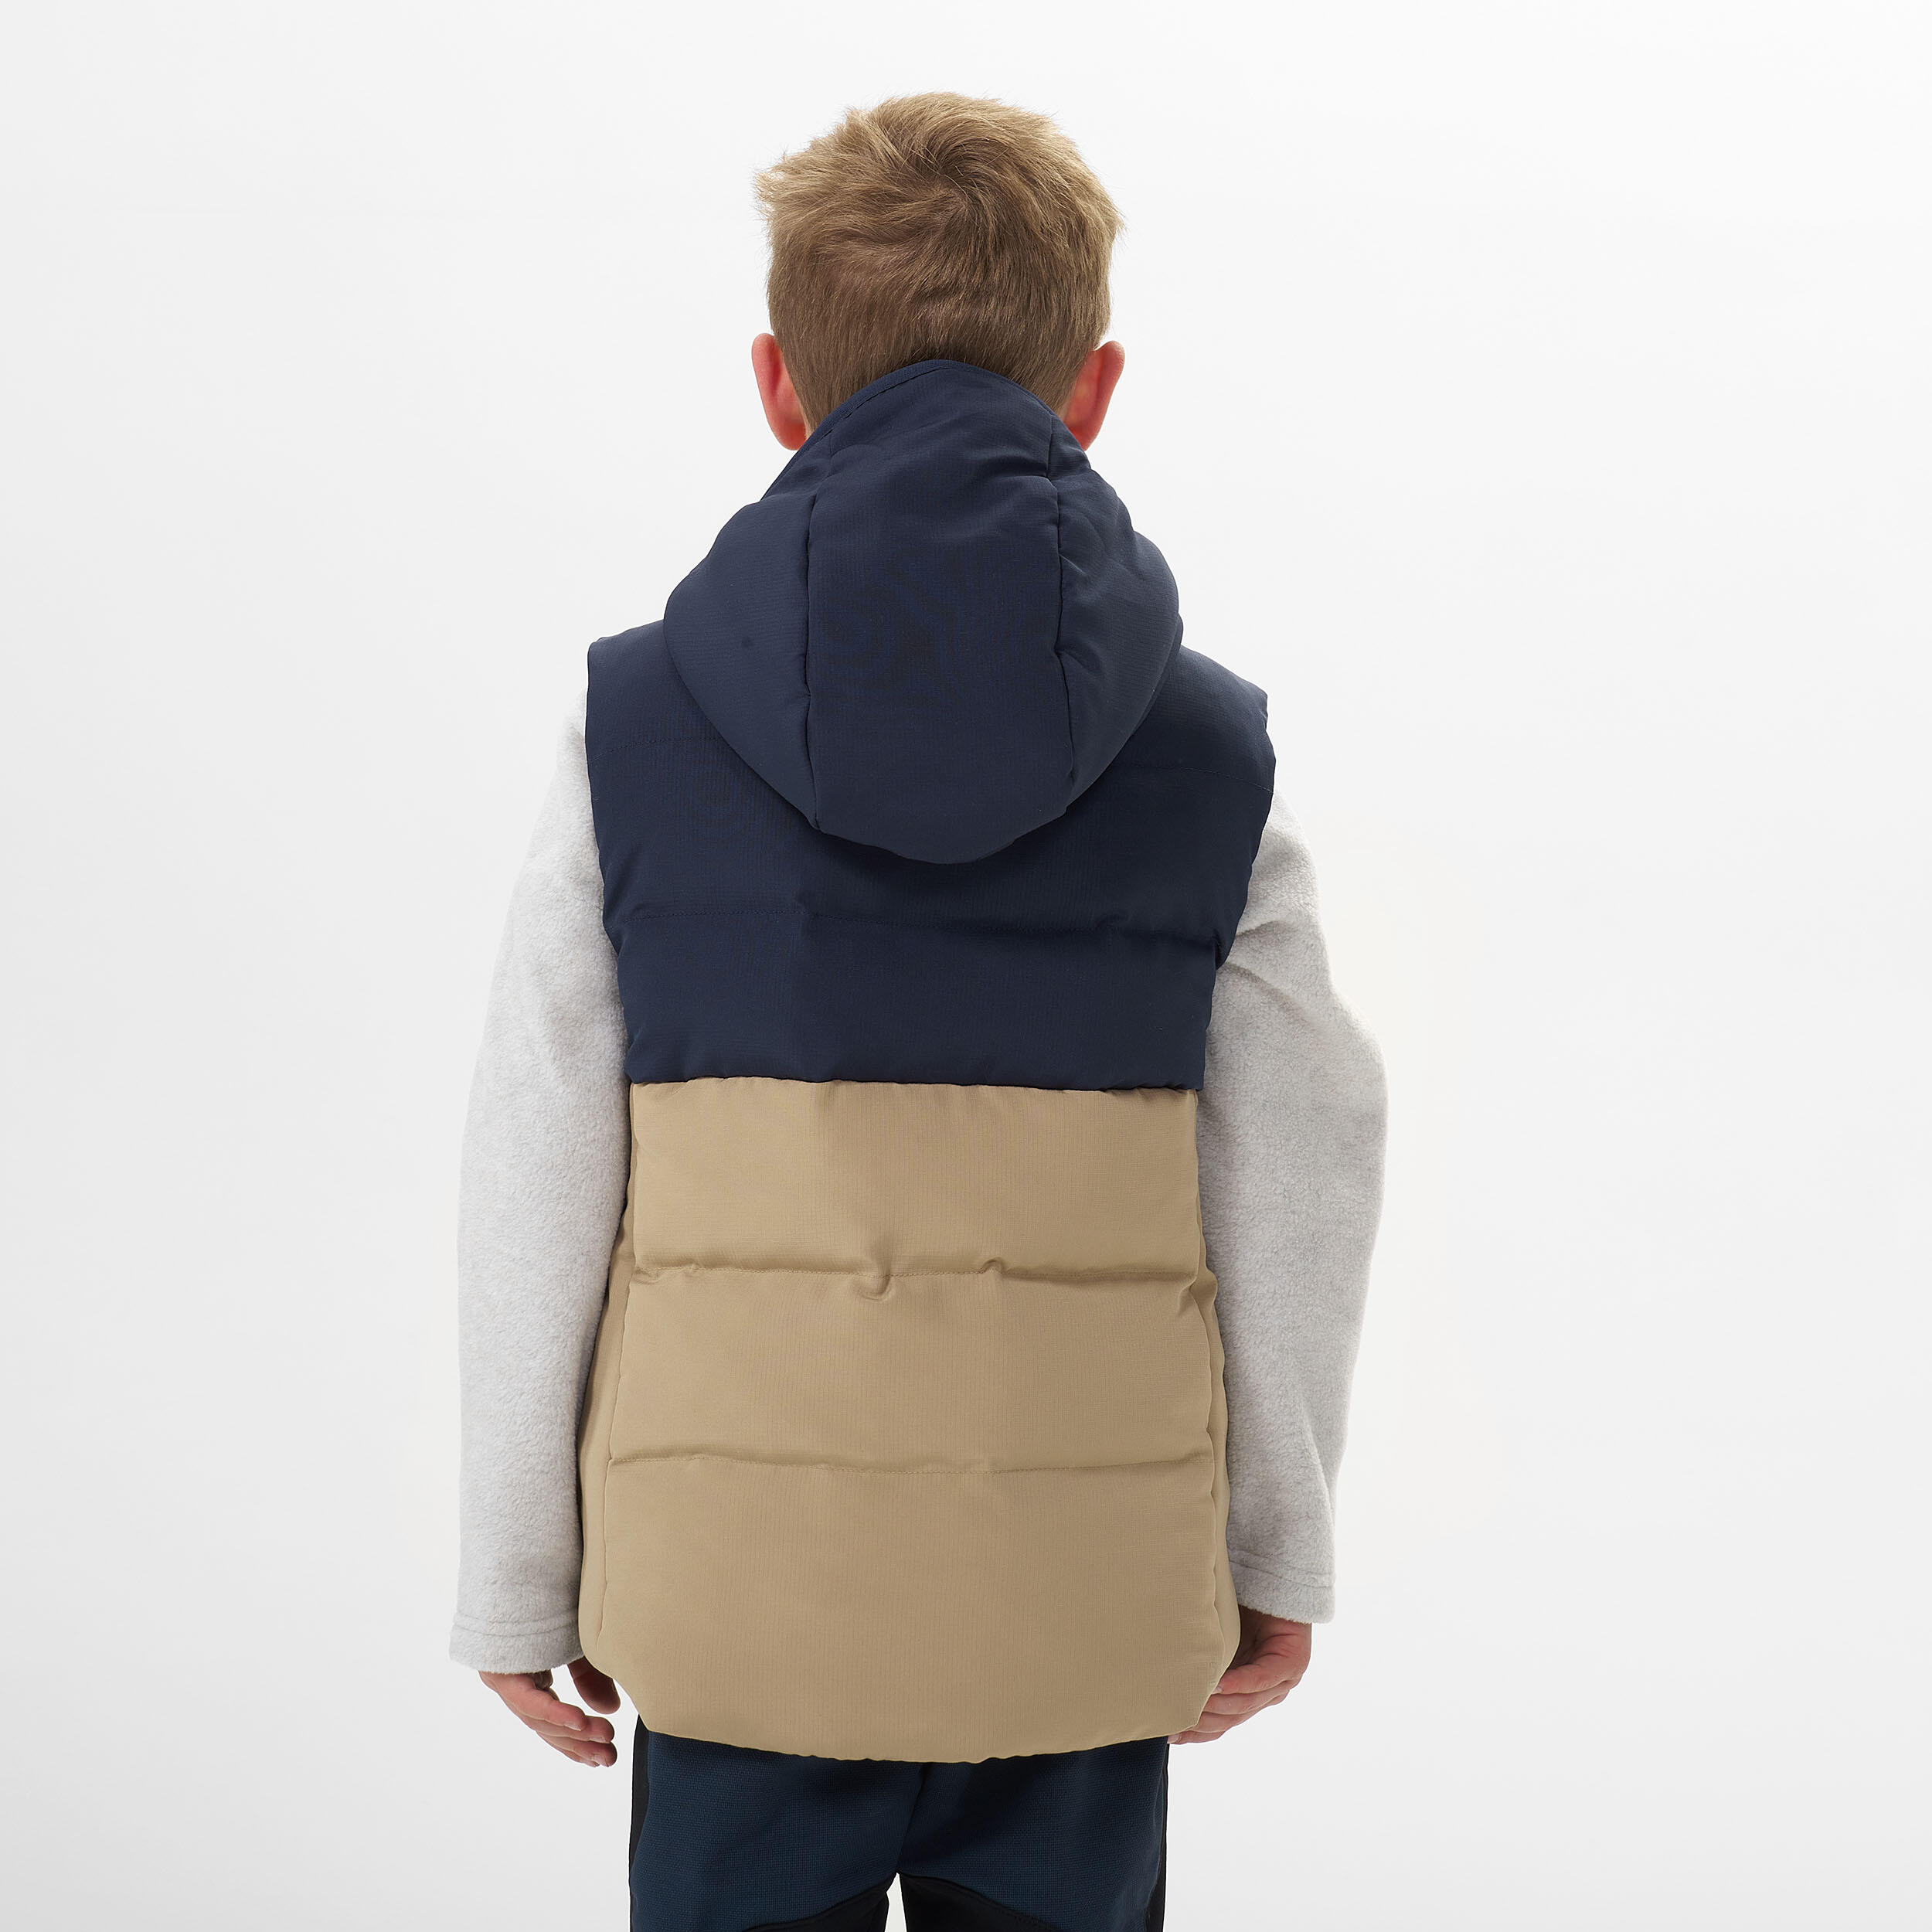 Kids’ Padded Hiking Gilet - Aged 2-6 - Beige and Blue 3/11